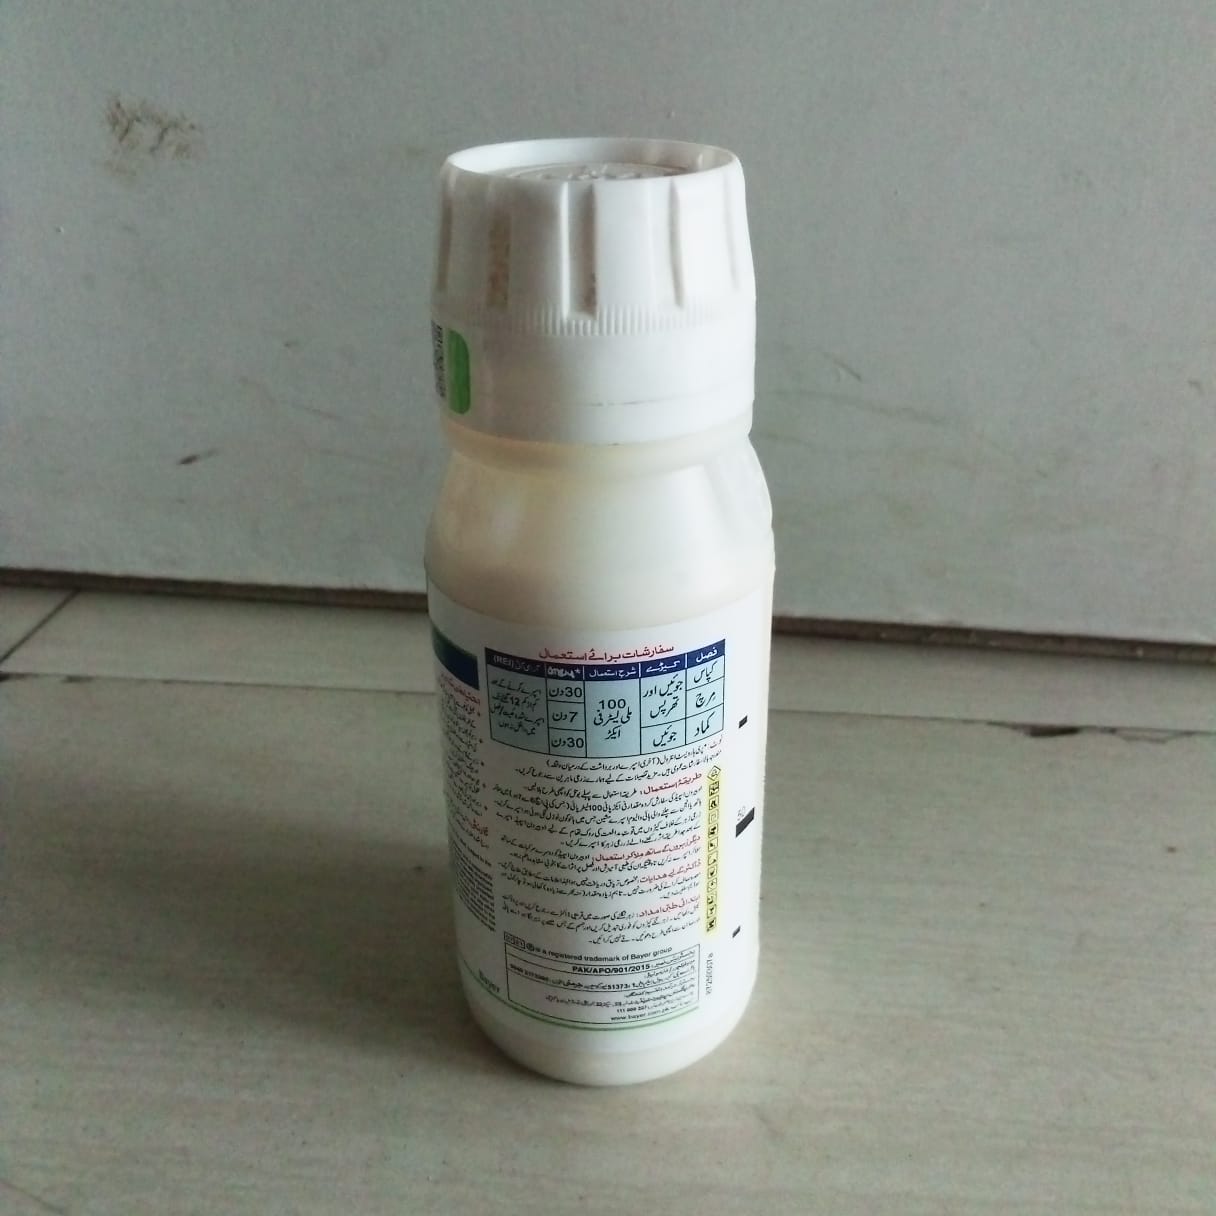 2nd Oberon Spiromesifine Abamectin 240sc 100ml Insecticide Bayer Crop Sciences